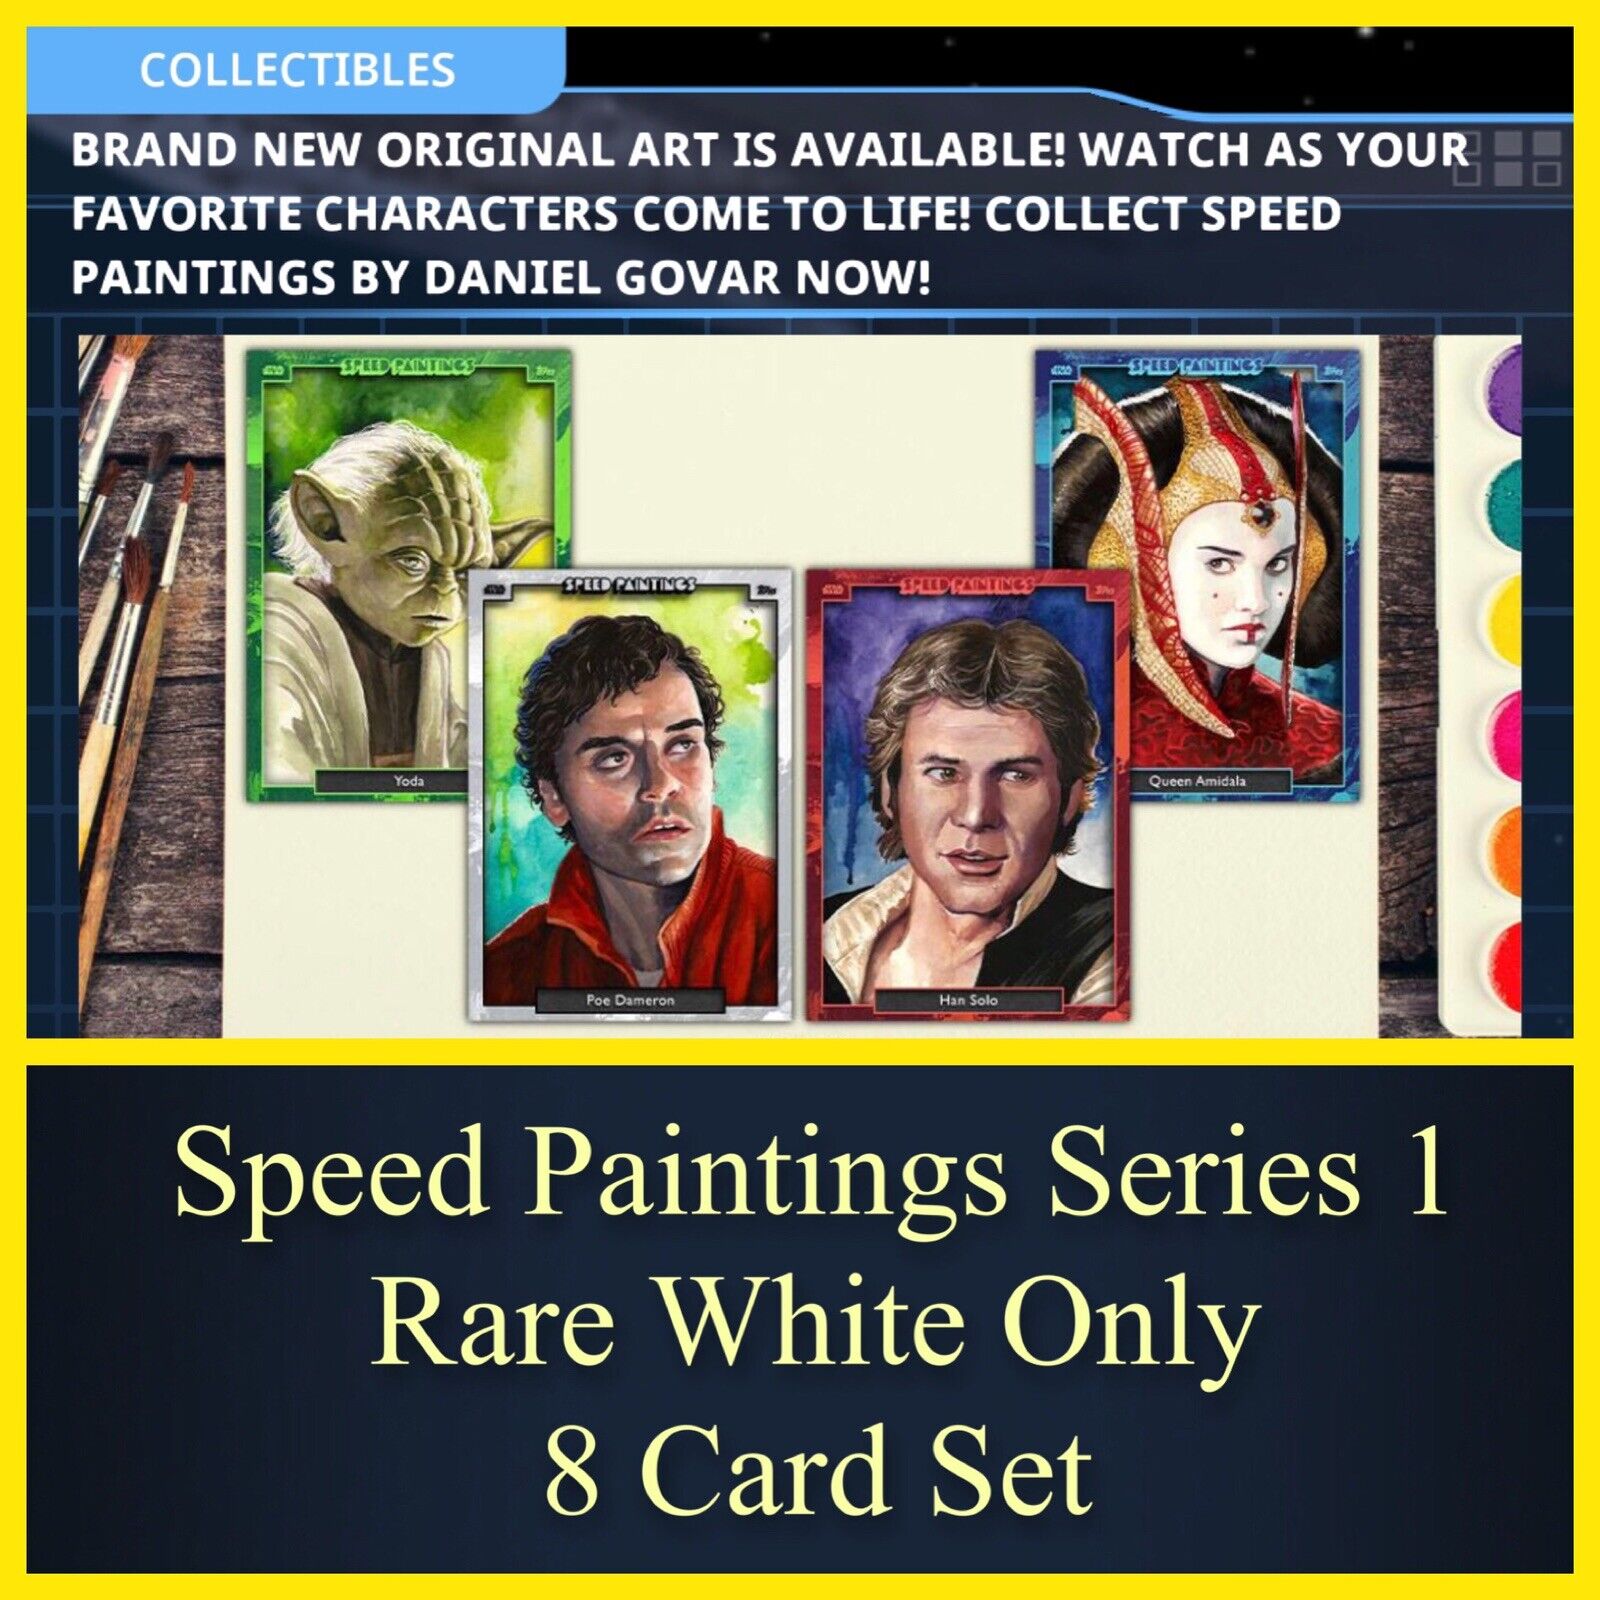 SPEED PAINTINGS SERIES 1 RARE WHITE ONLY 8 CARD SET-TOPPS STAR WARS CARD TRADER